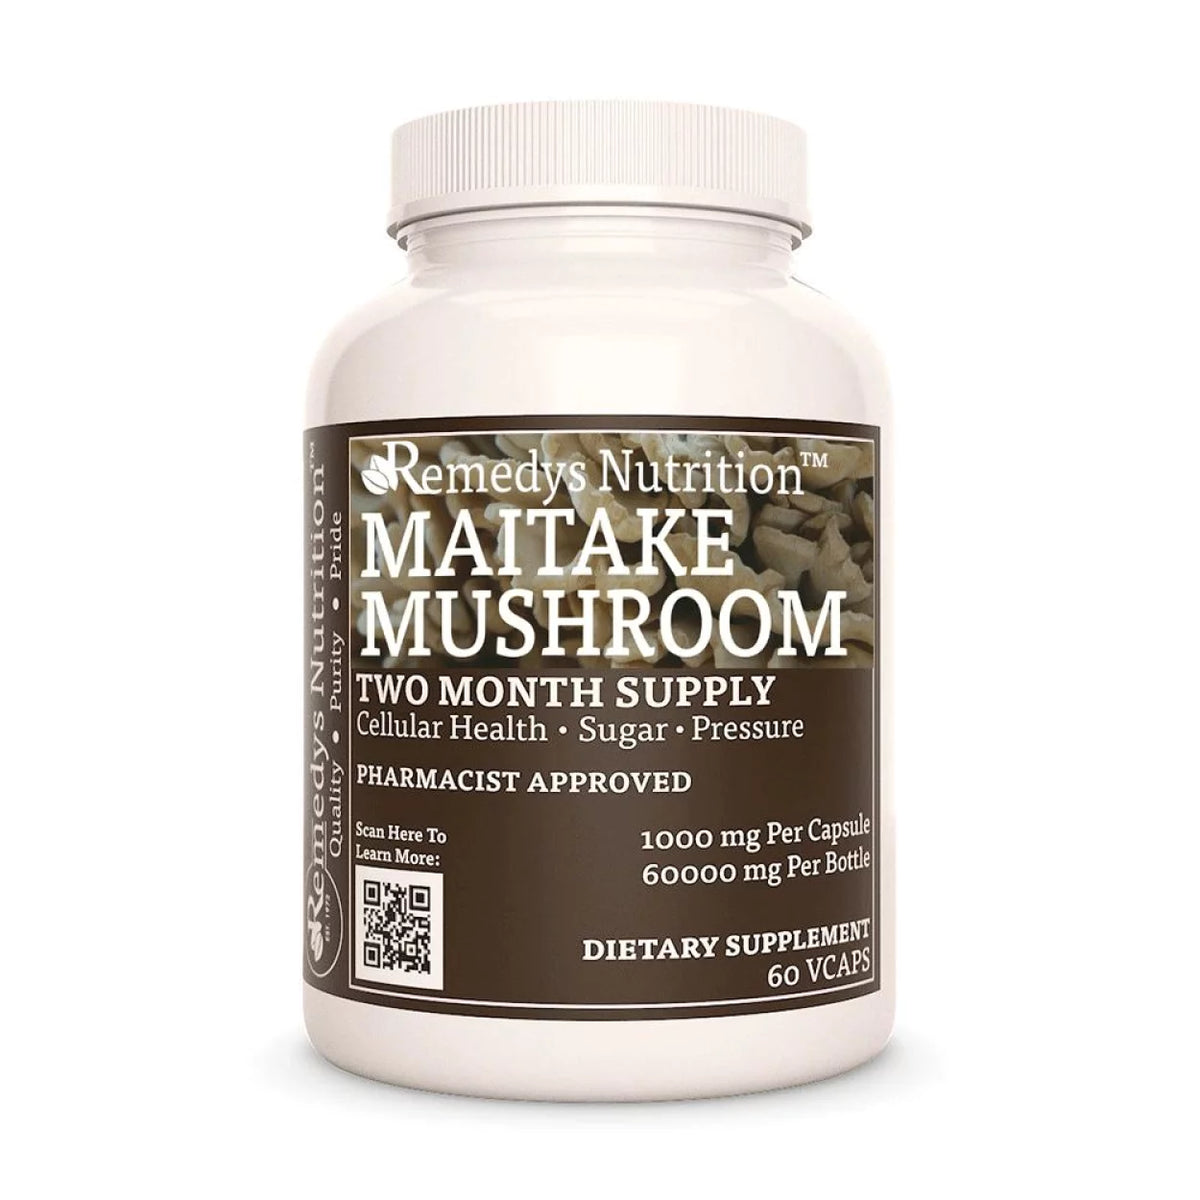 Image of Remedy's Nutrition® Maitake Mushroom Capsules Herbal Dietary Supplement front bottle. Made in the USA.